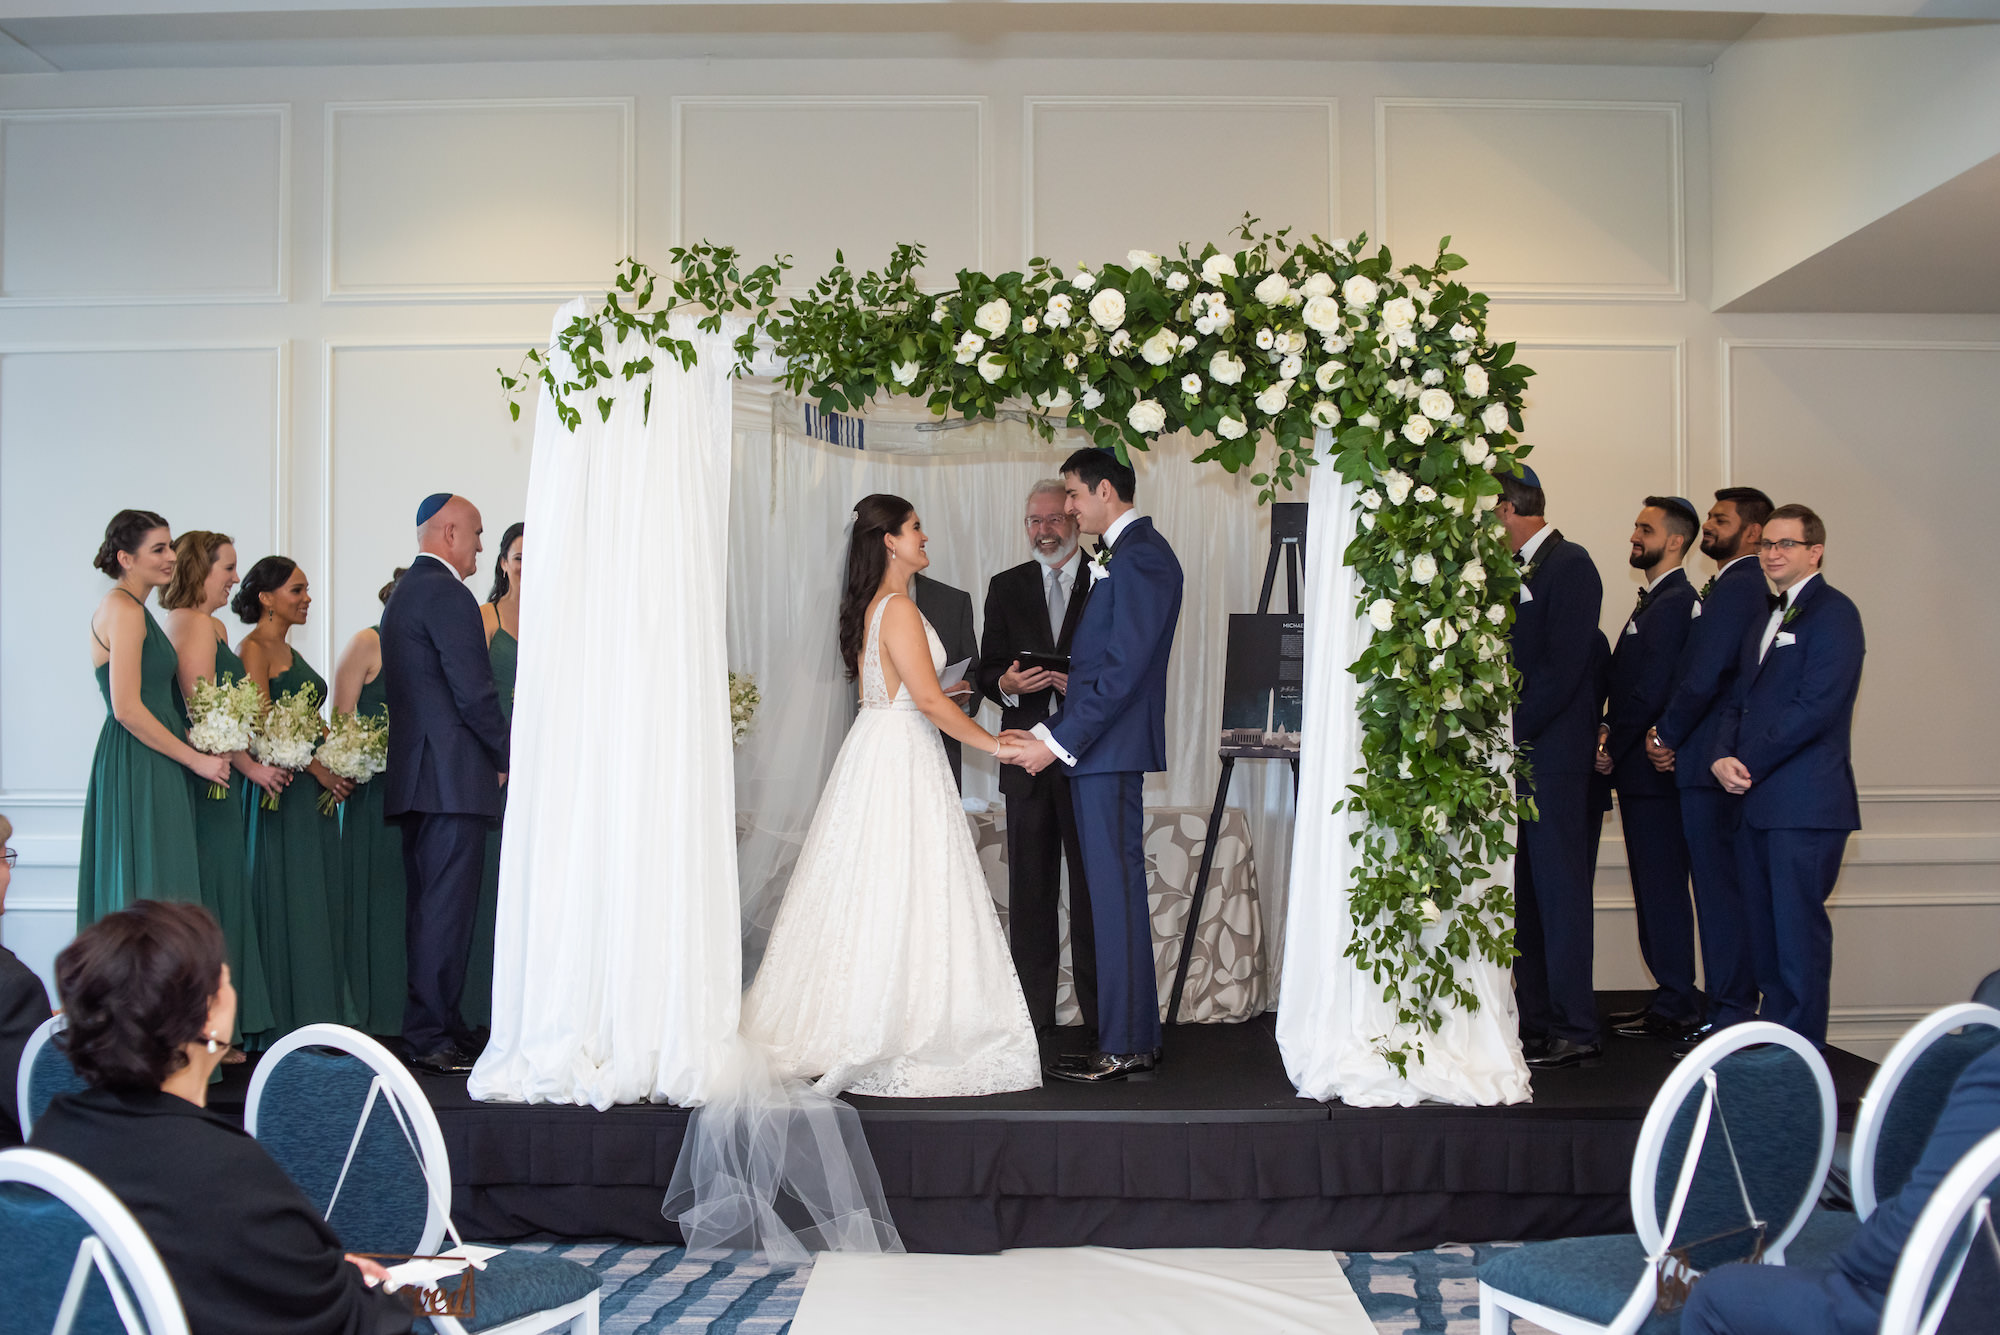 Jewish Bride and Groom Exchanging Wedding Vows During Ceremony, Chuppah with White Draping, Green Leaves and Ivory Roses Arrangement | Tampa Bay Wedding Planner UNIQUE Weddings + Events | St. Petersburg Waterfront Hotel Wedding Venue The Don CeSar | Historic Pink Palace